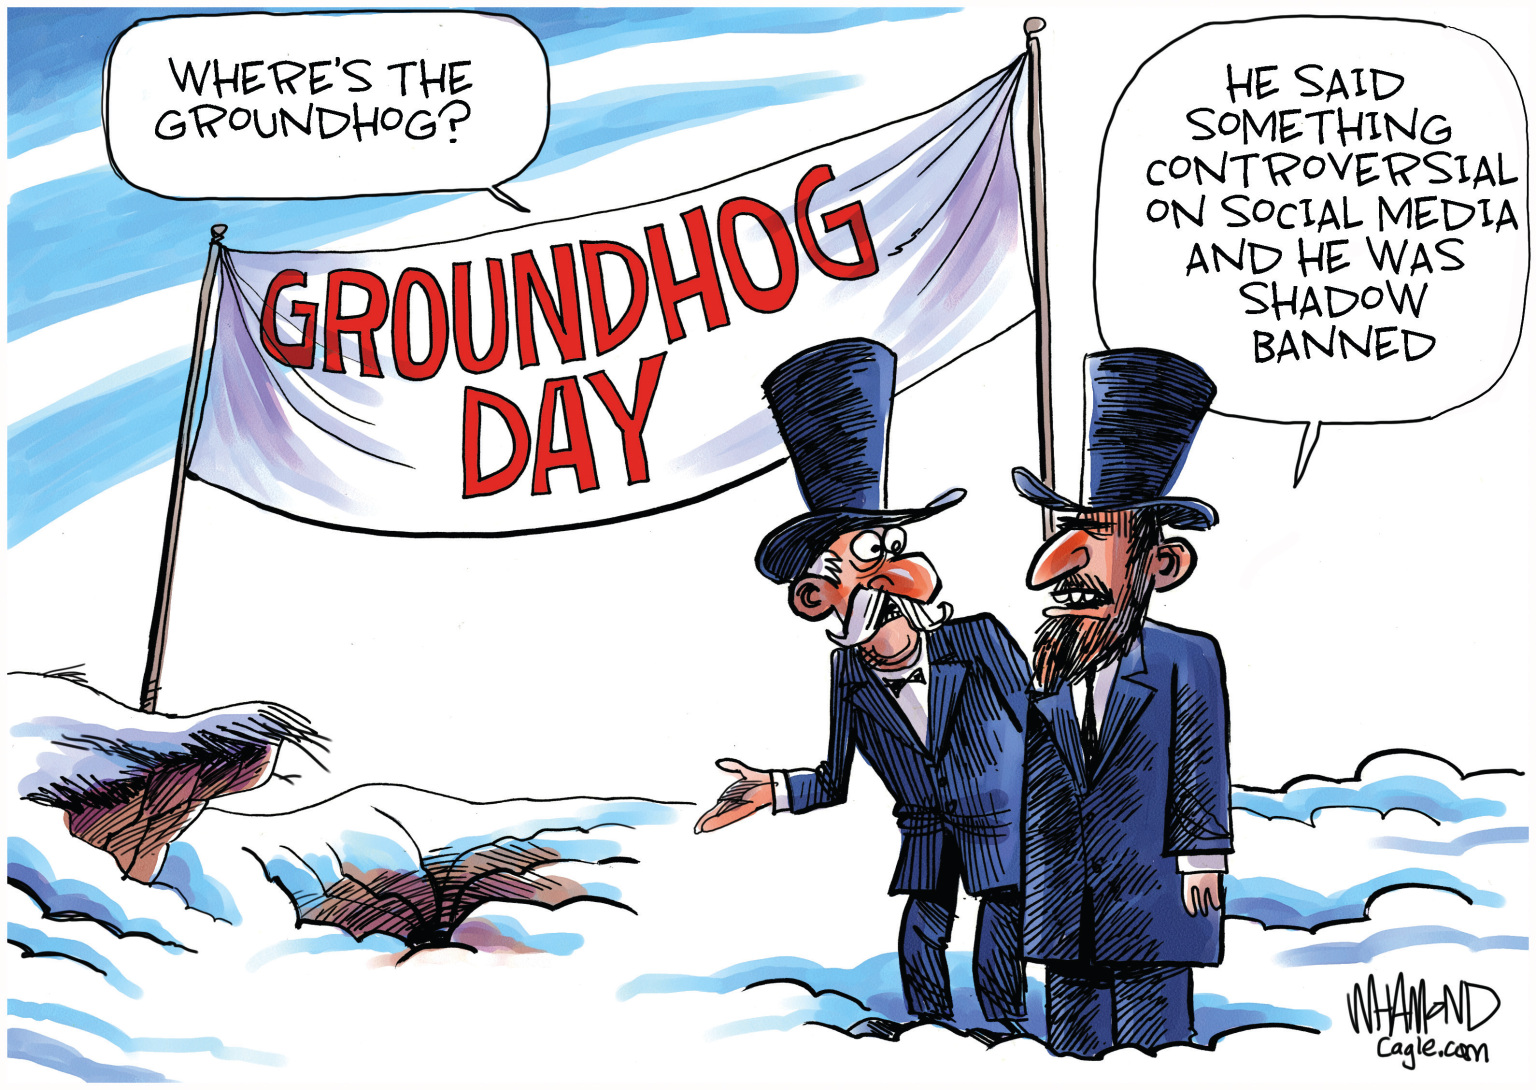 The Groundhog's Shadow - By Dave Whamond